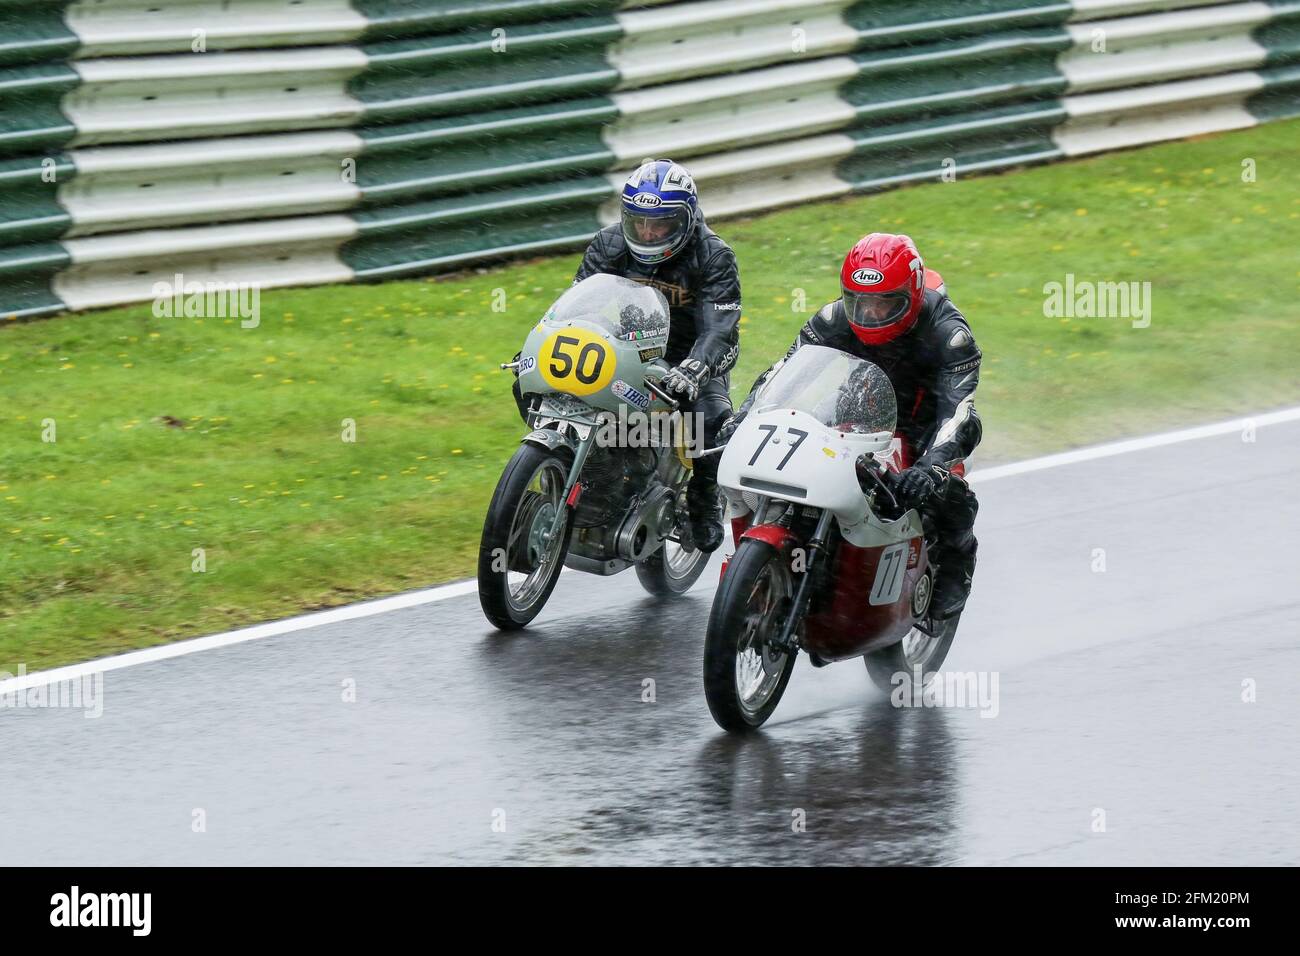 Gary Thwaites and Leroy Bruno racing side by side in the rain during the Classic King of Cadwell Race, the Cadwell International Classic in July 2015 Stock Photo